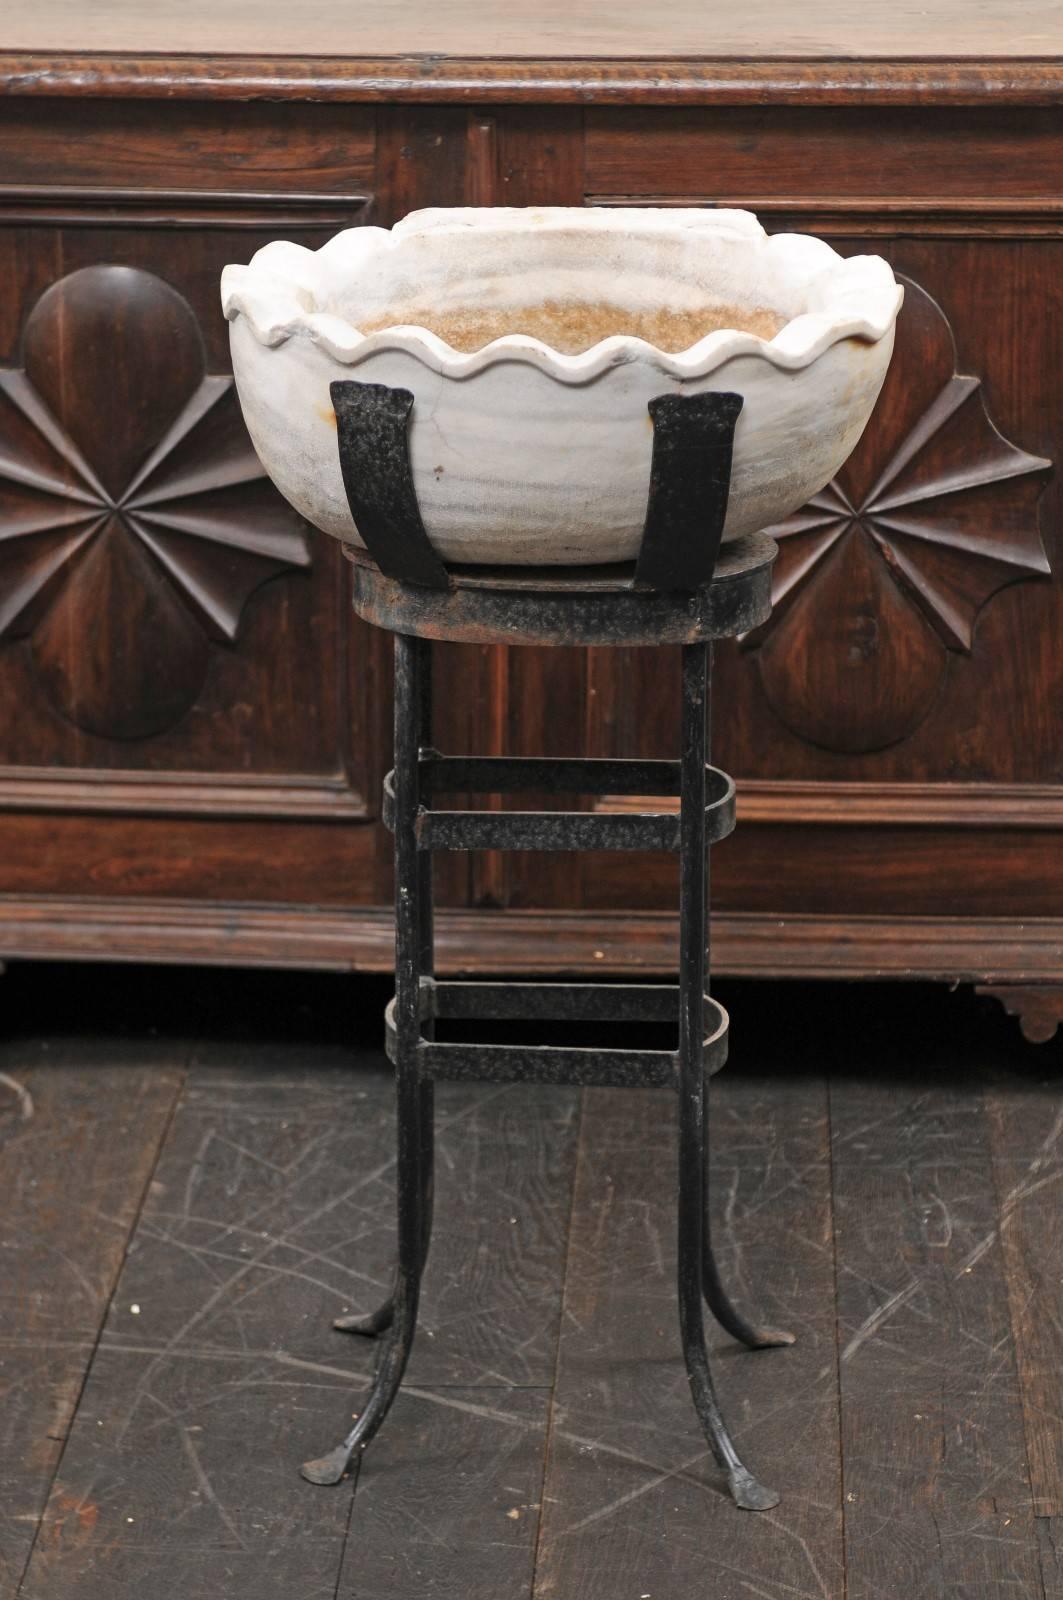 A 19th century Italian marble sink on metal stand. This antique sink with it's black forged iron stand was originally used as a holy water container. The oval-shaped sink is hand-carved marble with a beautifully scalloped rim. The iron stand is